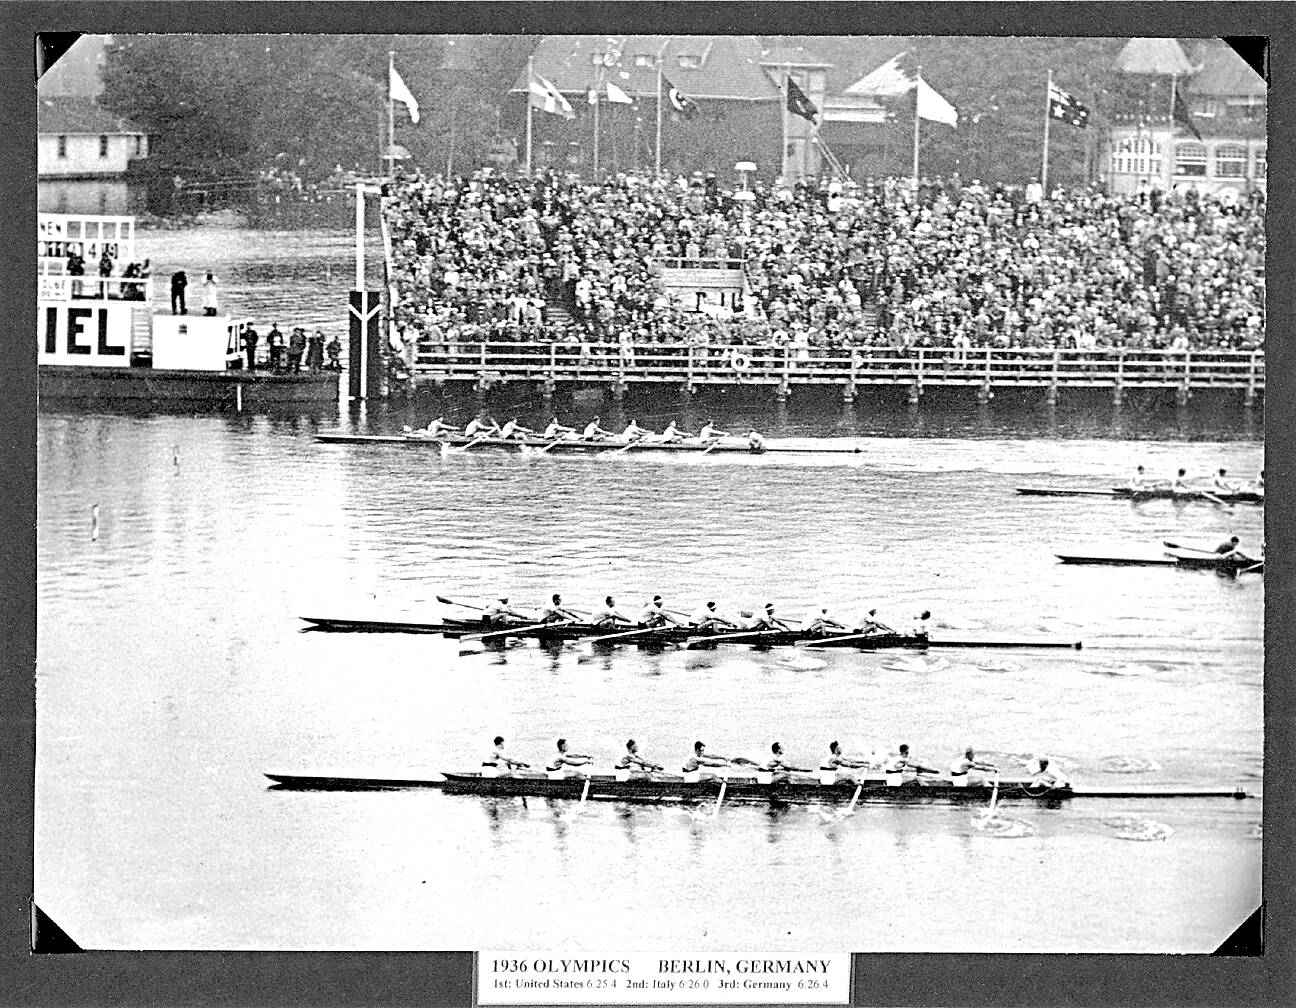 Photo courtesy of Joe Rantz/Judy Willman / The American eight-man crew (foreground) edges Italy (center) by eight feet, securing the USA’s gold medal in the 1936 Olympic Games.